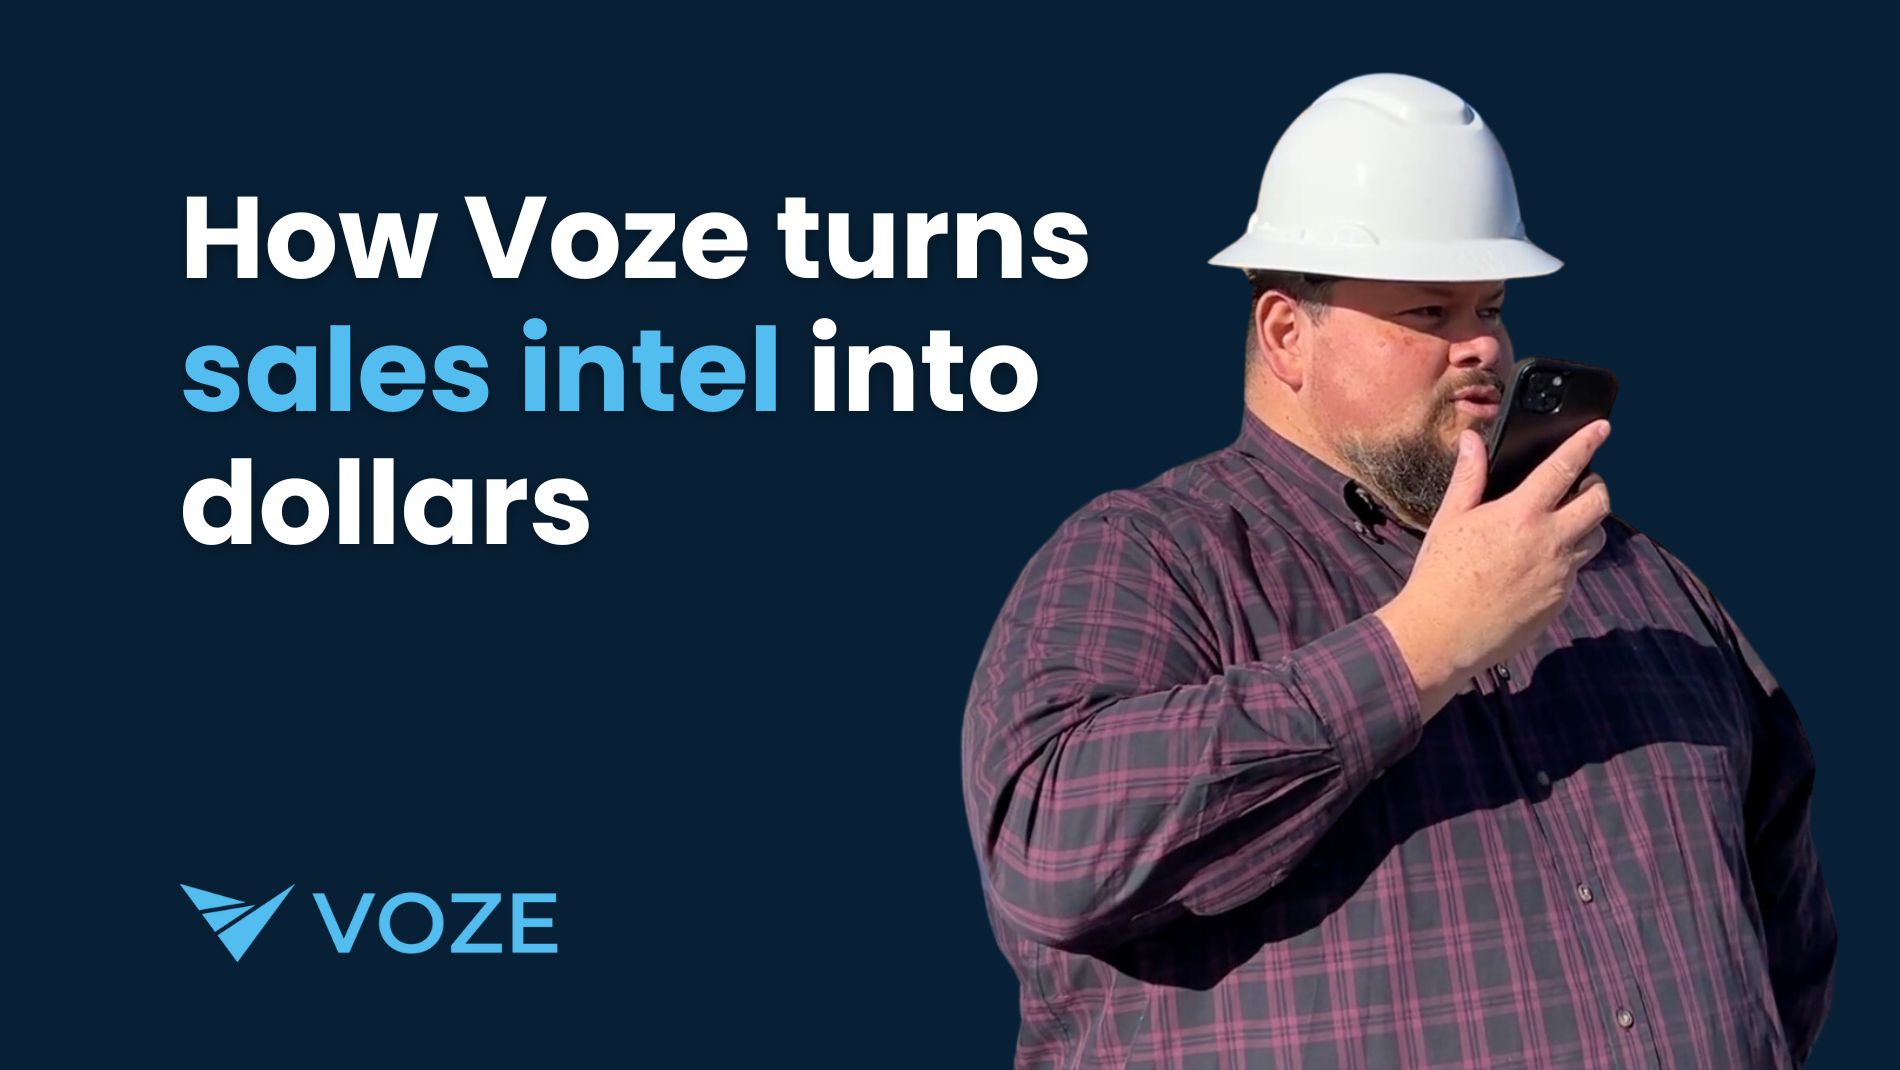 Better Notes. More Visibility. How Voze Turns Sales Intel Into Dollars